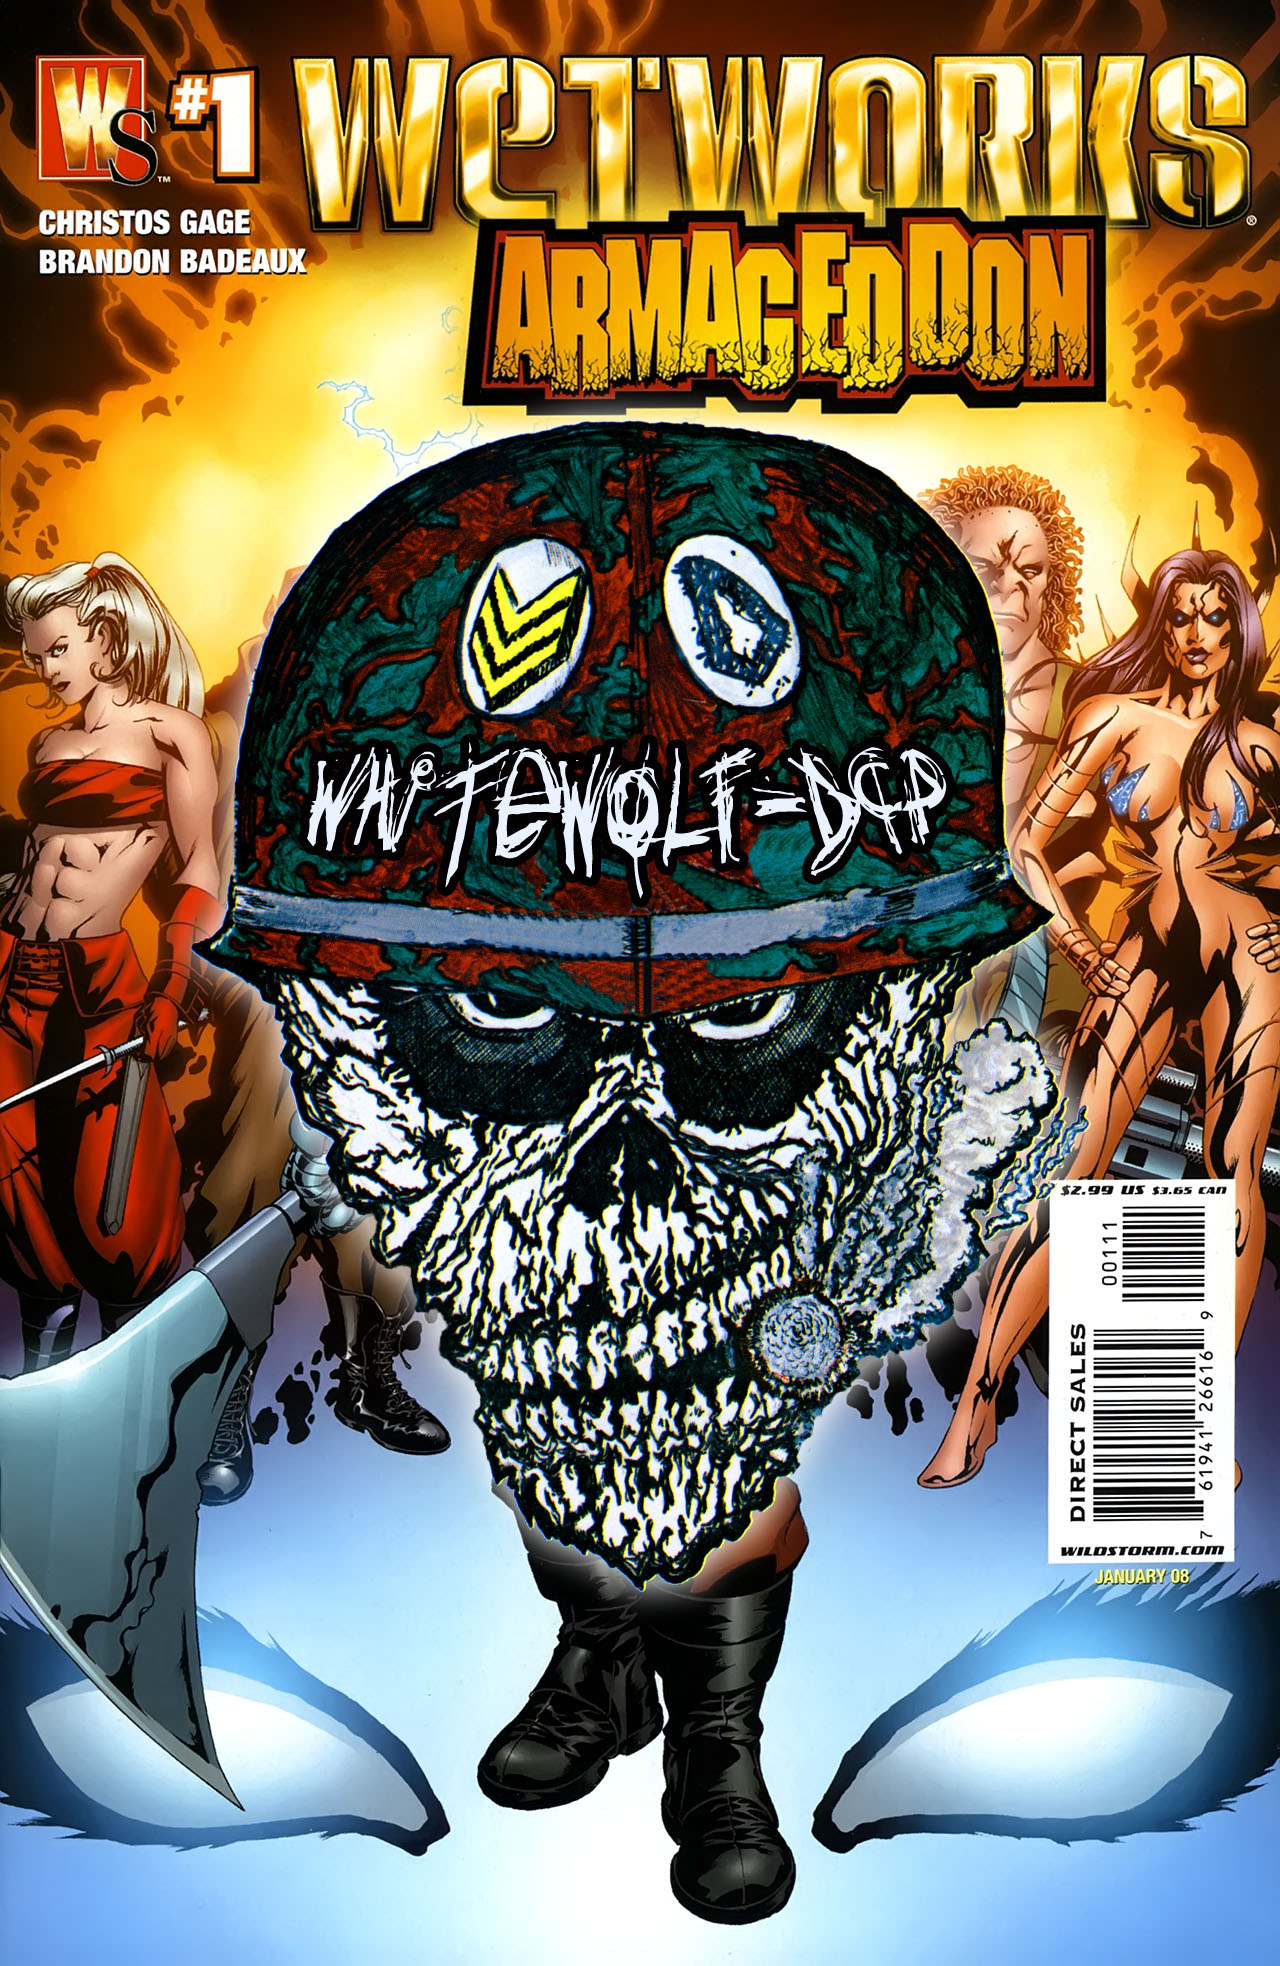 Read online Wetworks: Armageddon comic -  Issue # Full - 24